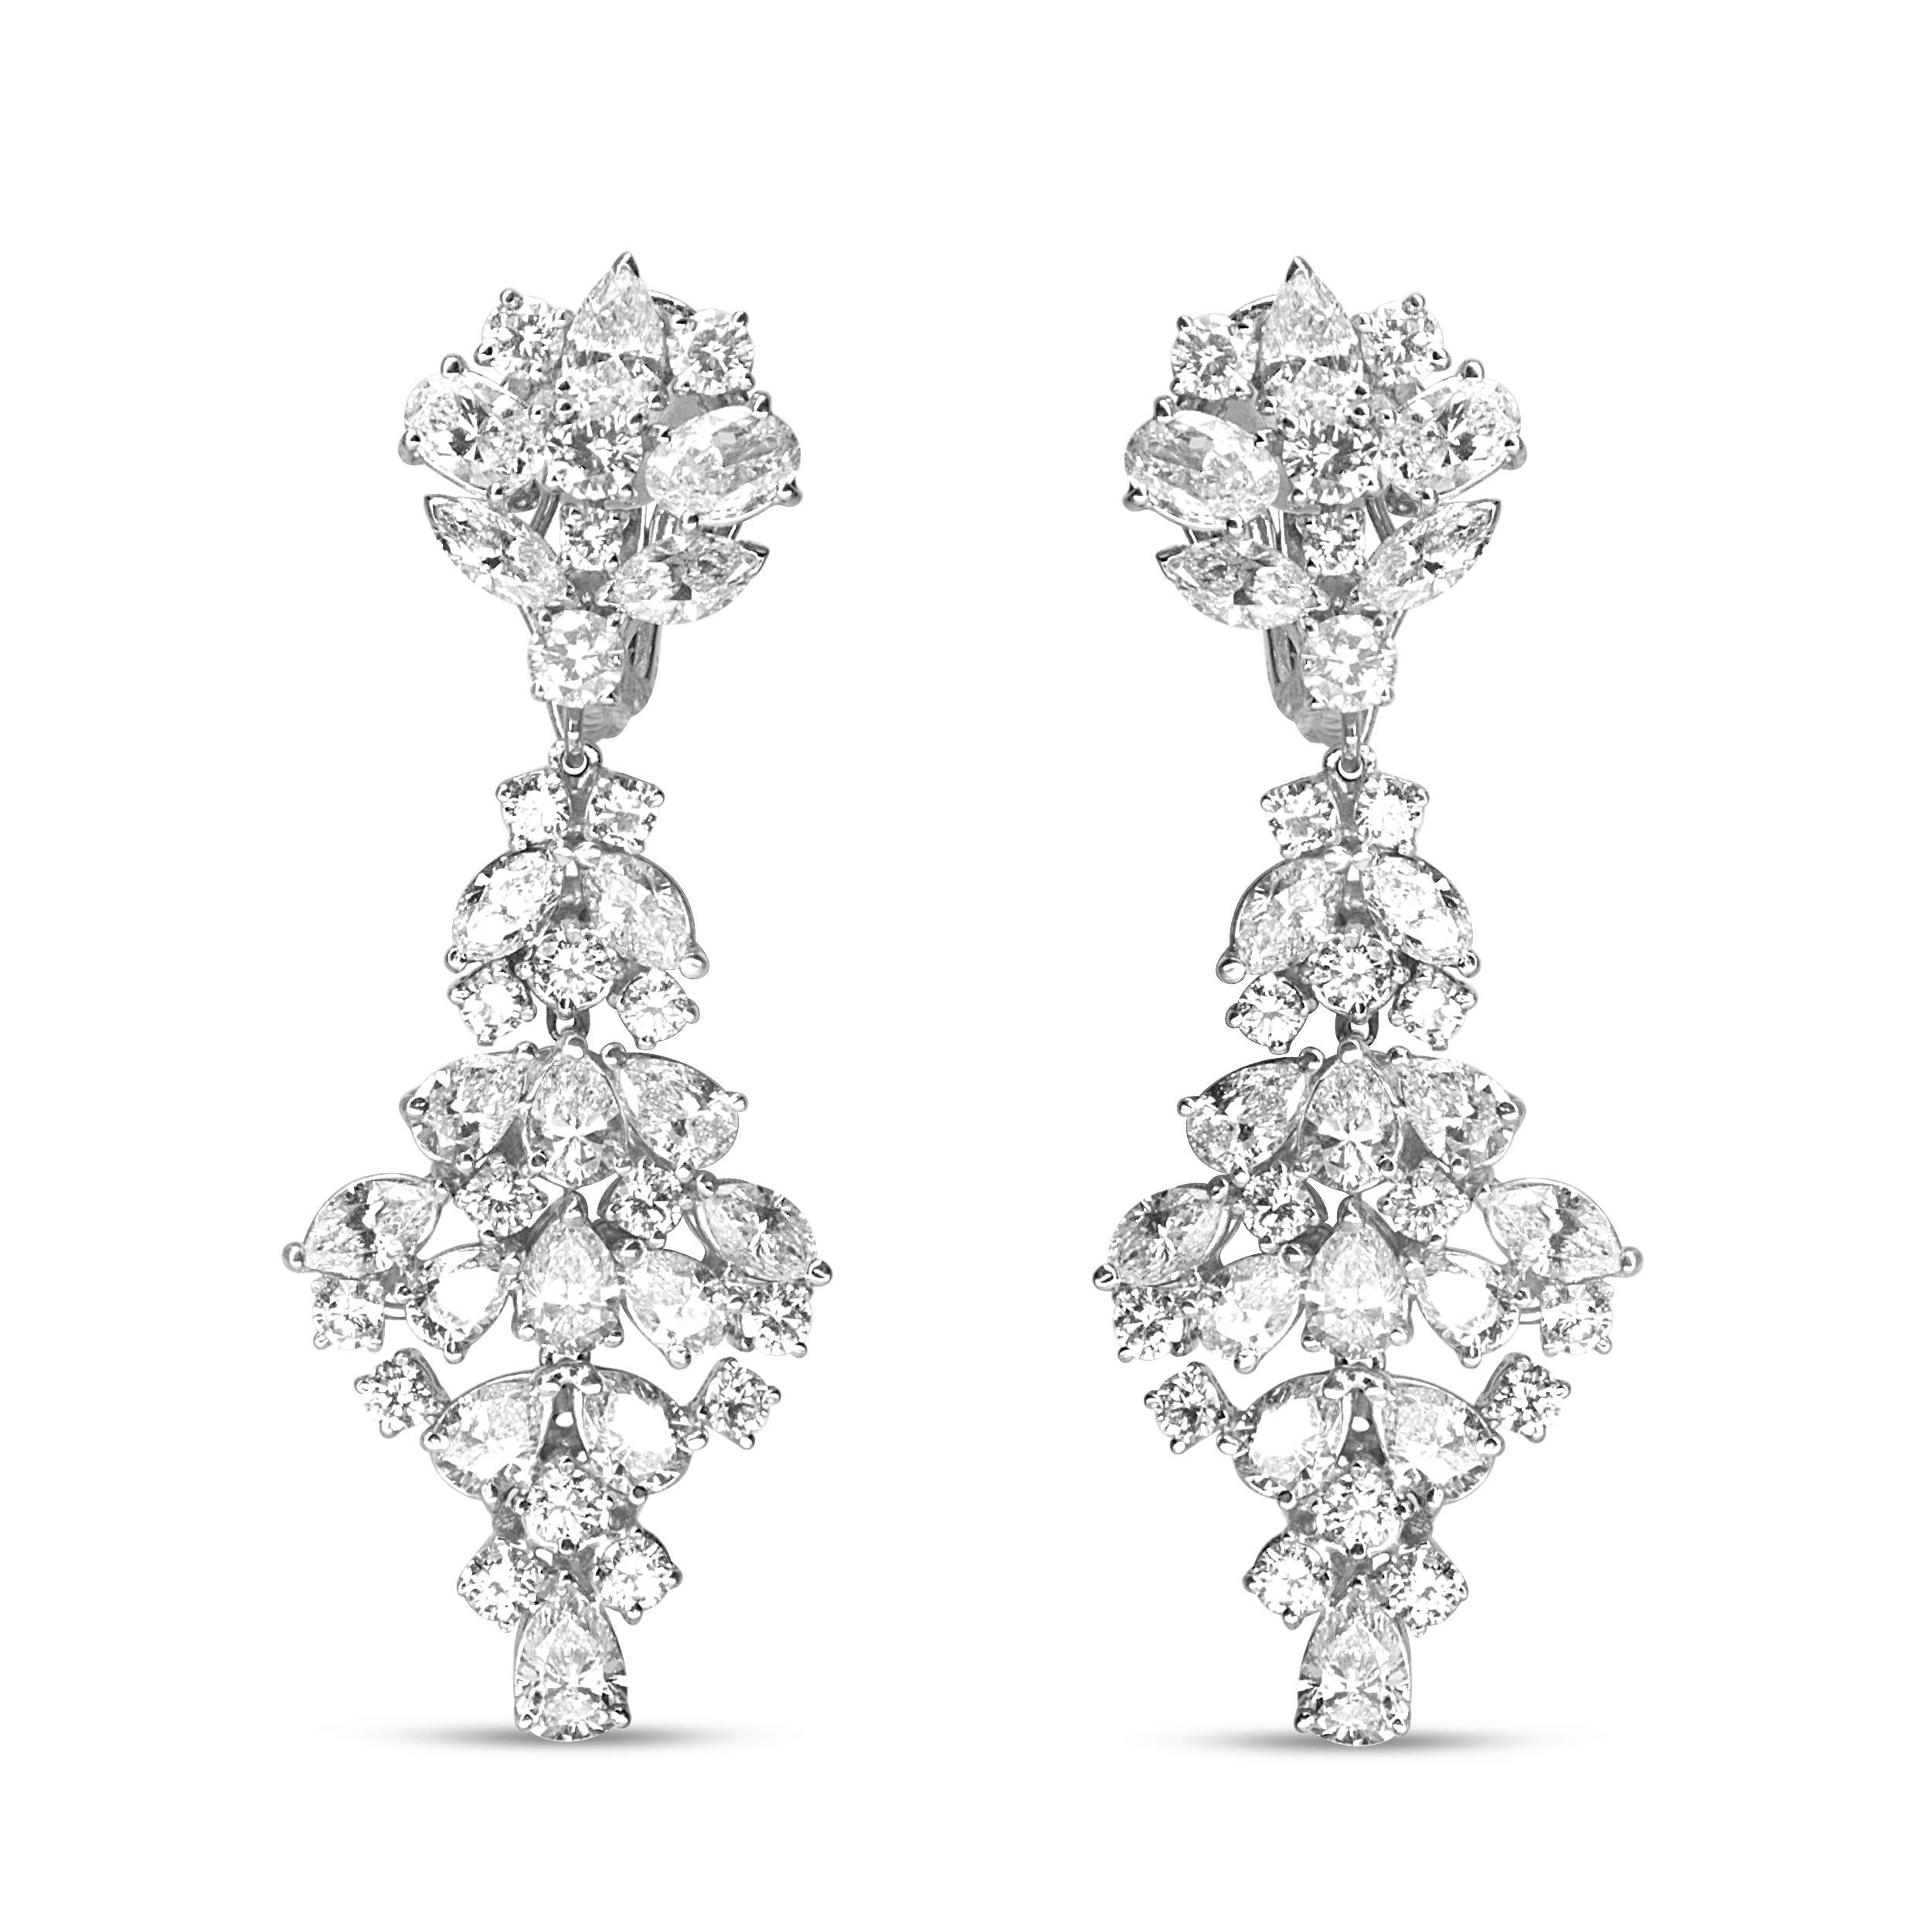 Brimming with the vivacious sparkle of natural, white diamonds, these dazzling drop earrings for her feature marquise, oval, pear, and round shaped diamonds in a prong-setting and arranged in a cluster design. These geometric-inspired cluster